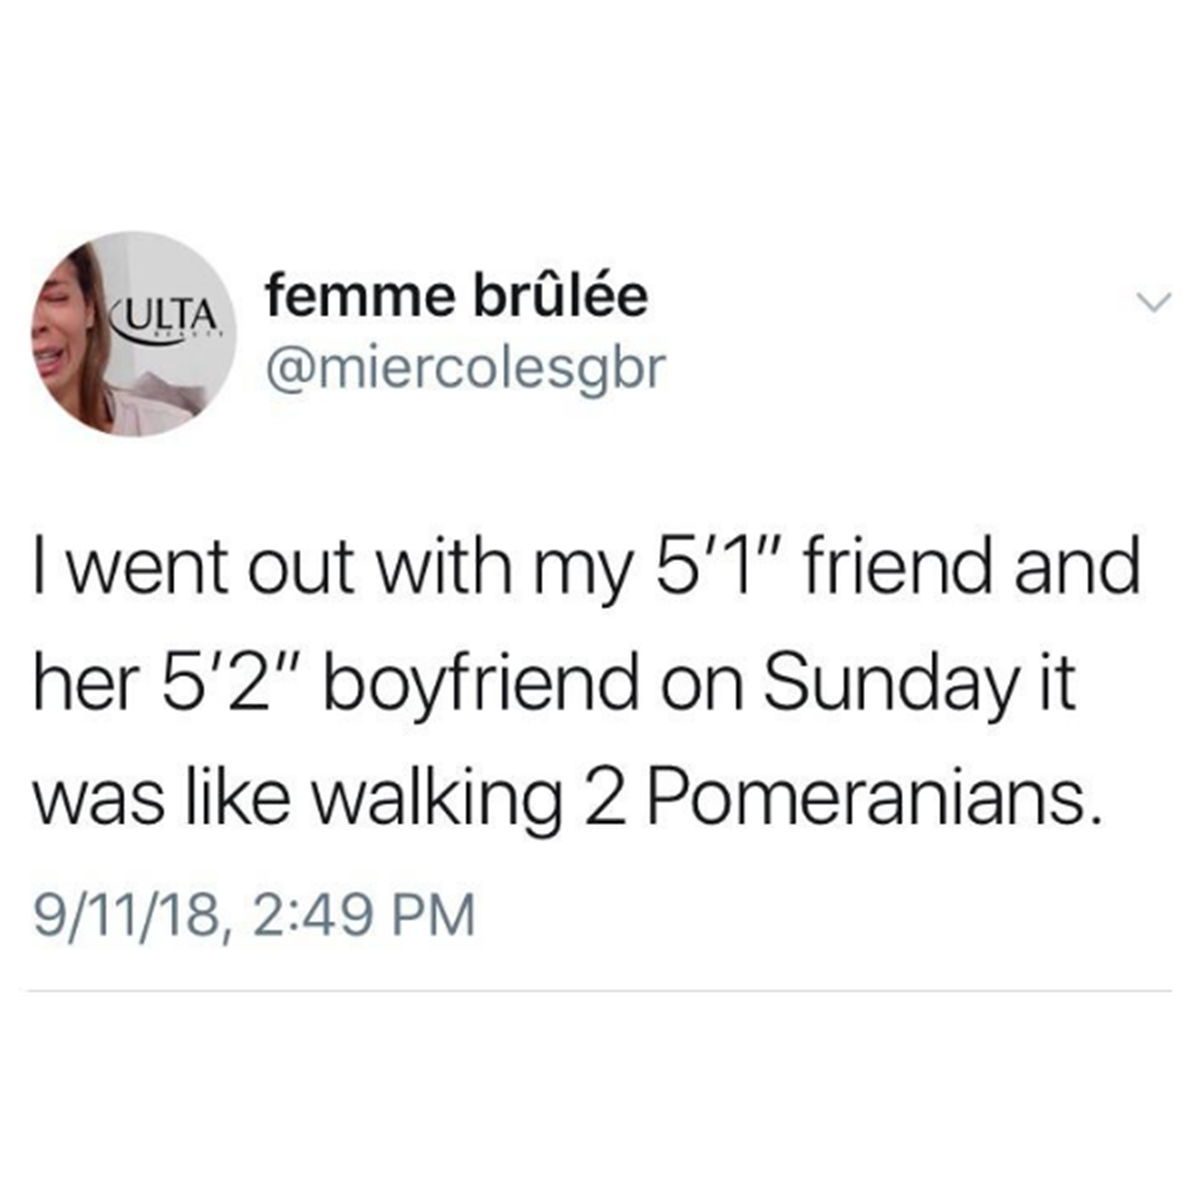 screenshot - Ulta femme brle I went out with my 5'1" friend and her 5'2" boyfriend on Sunday it was walking 2 Pomeranians. 91118,